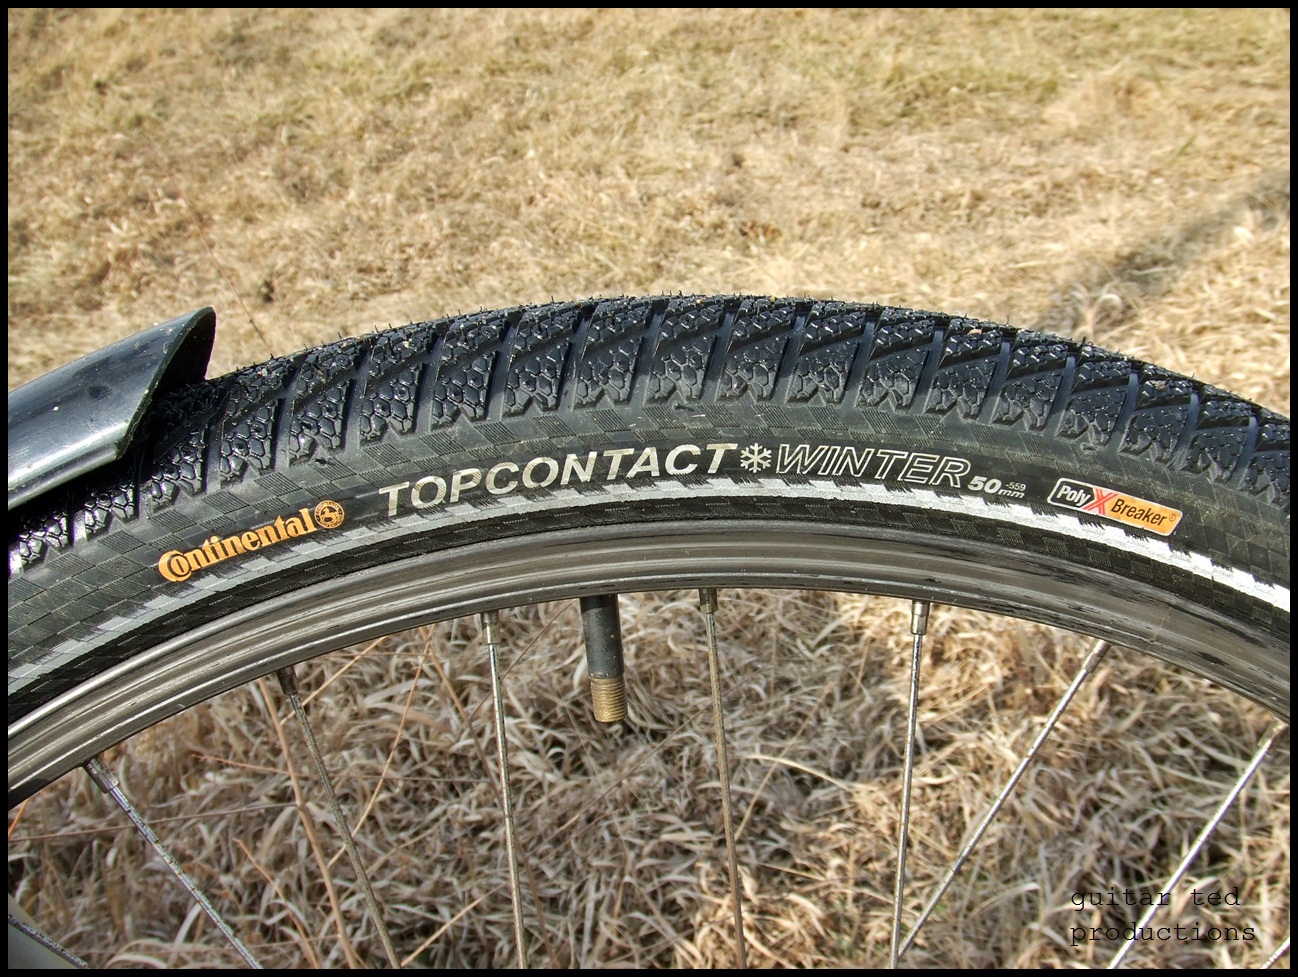  Winter Tires 2012 on Guitar Ted Productions  Continental Top Contact Winter Tire Review